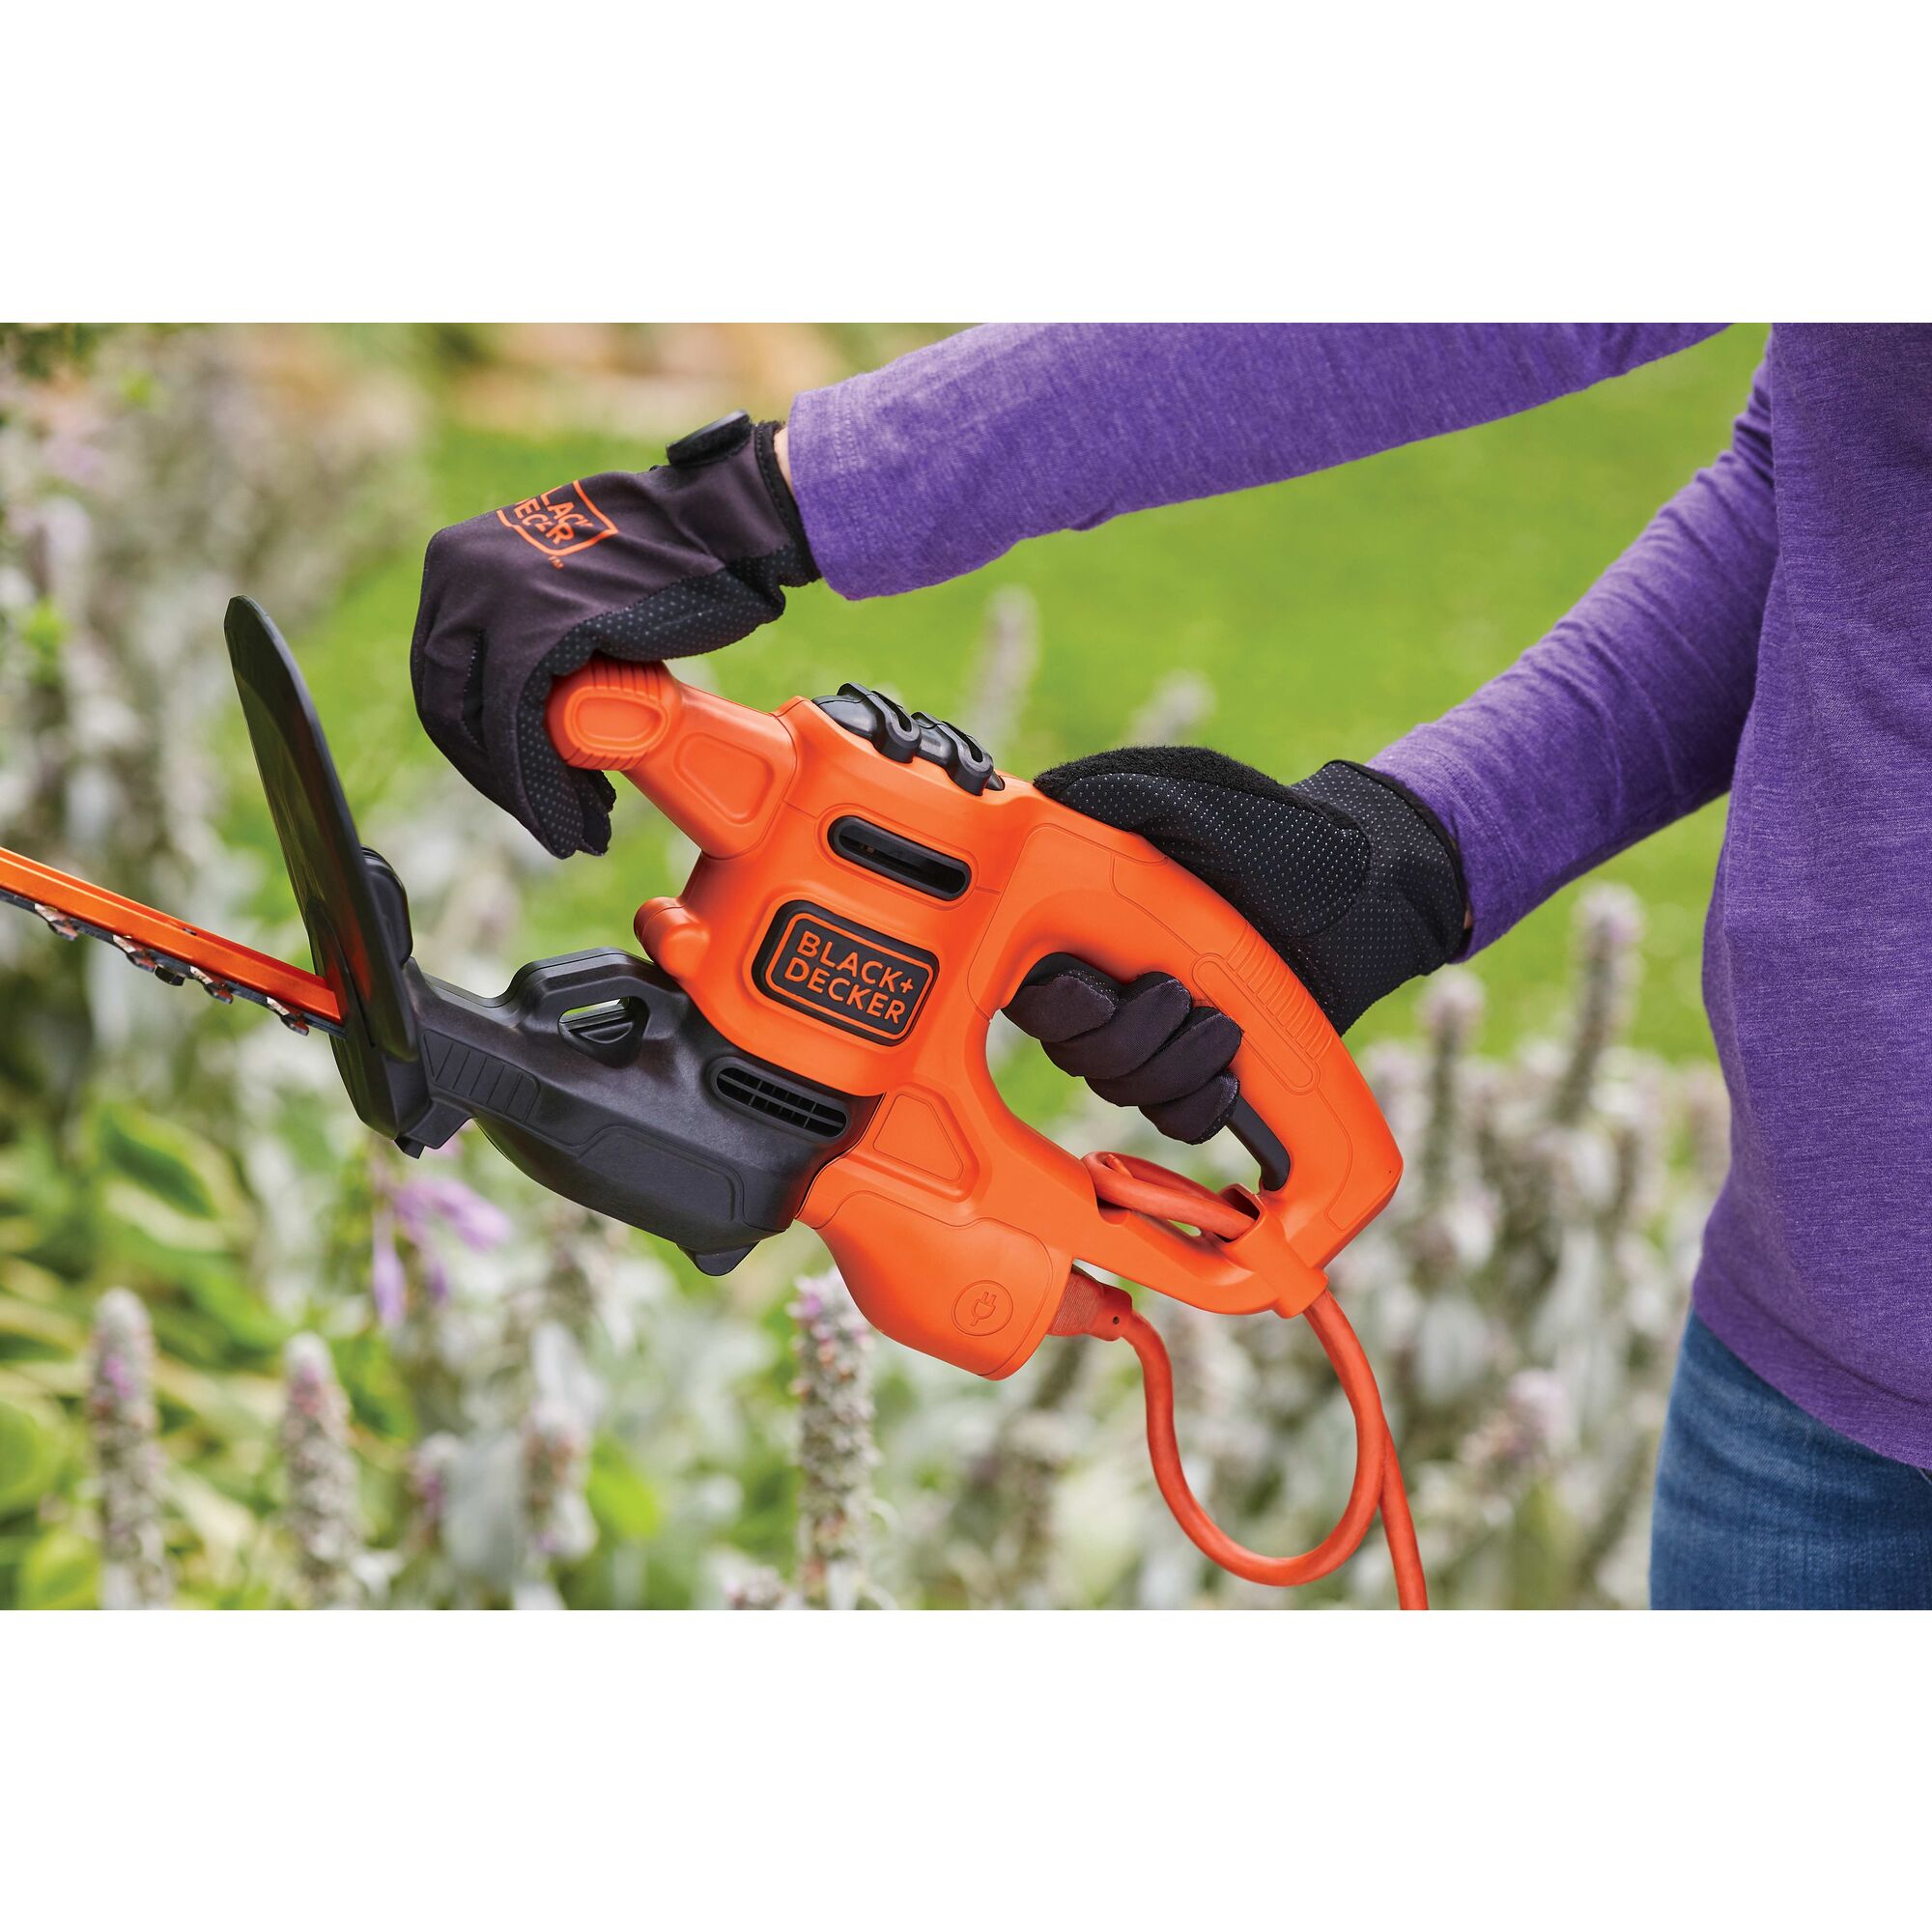 Built in T handle feature of 17 inch electric hedge trimmer.